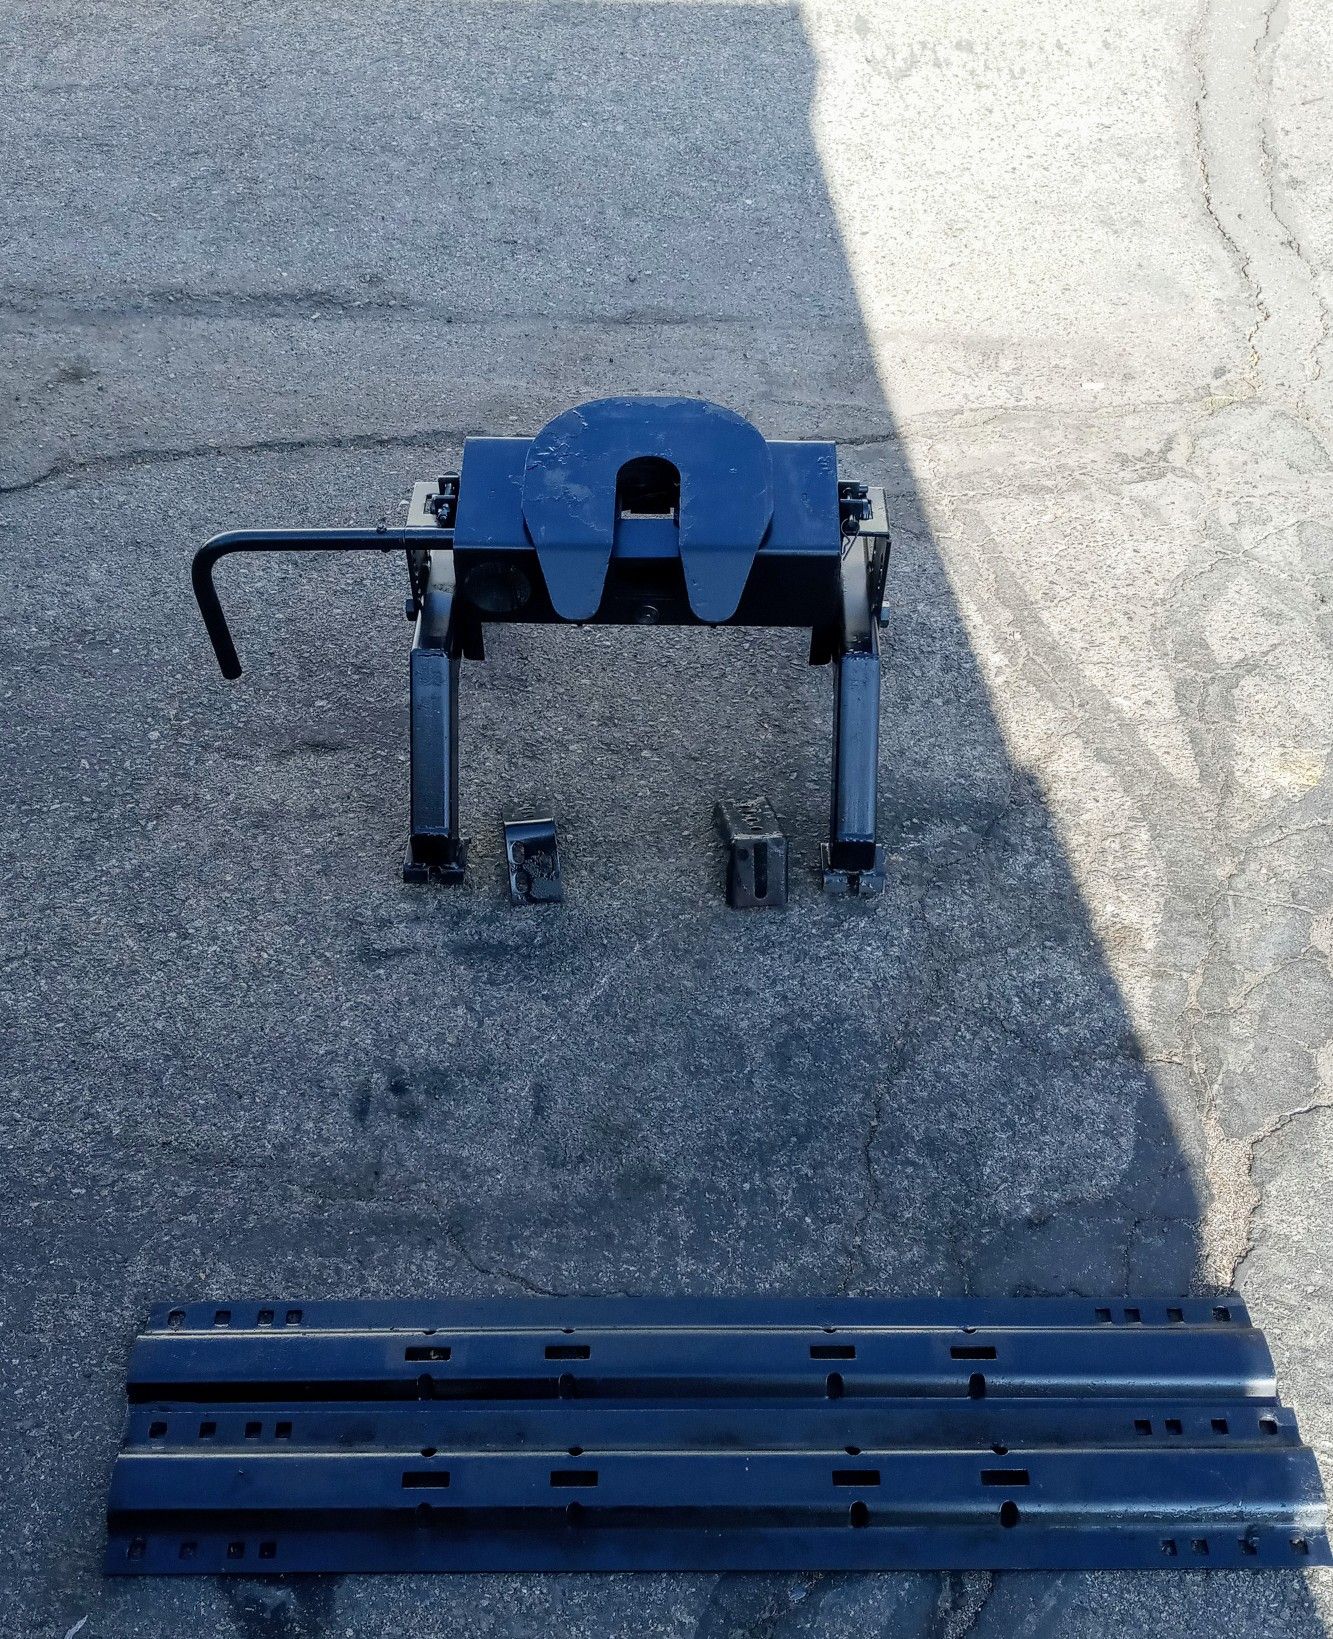 Used fifth wheel hitch. 200.00 or best offer